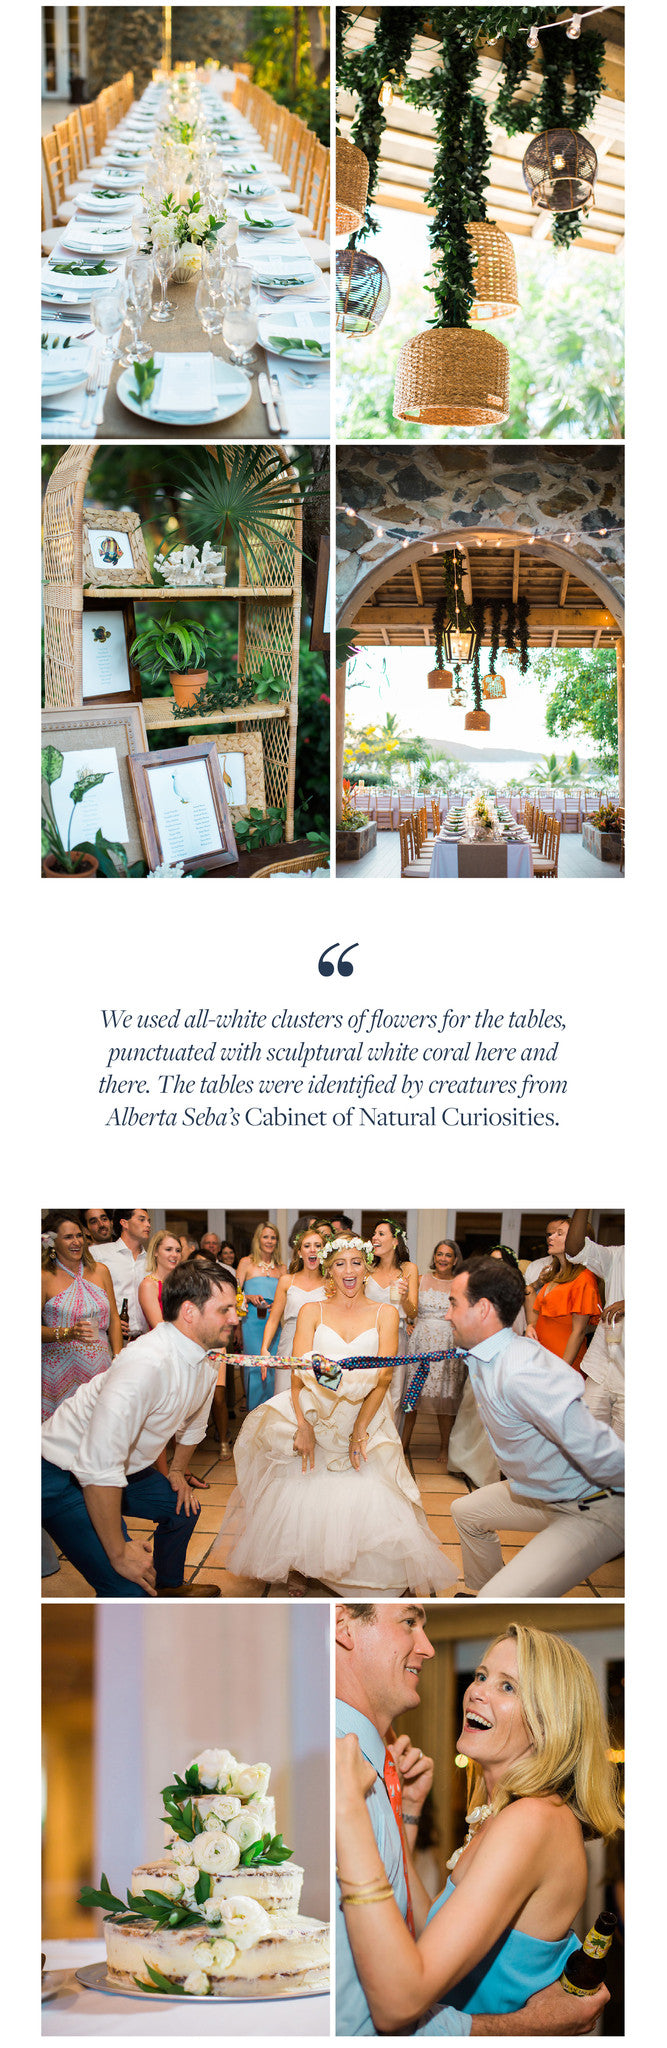 We used all-white clusters of flowers for the tables, punctuated with sculptural white coral here and there. The tables were identified by creatures from Alberta Seba’s Cabinet of Natural Curiosities. 